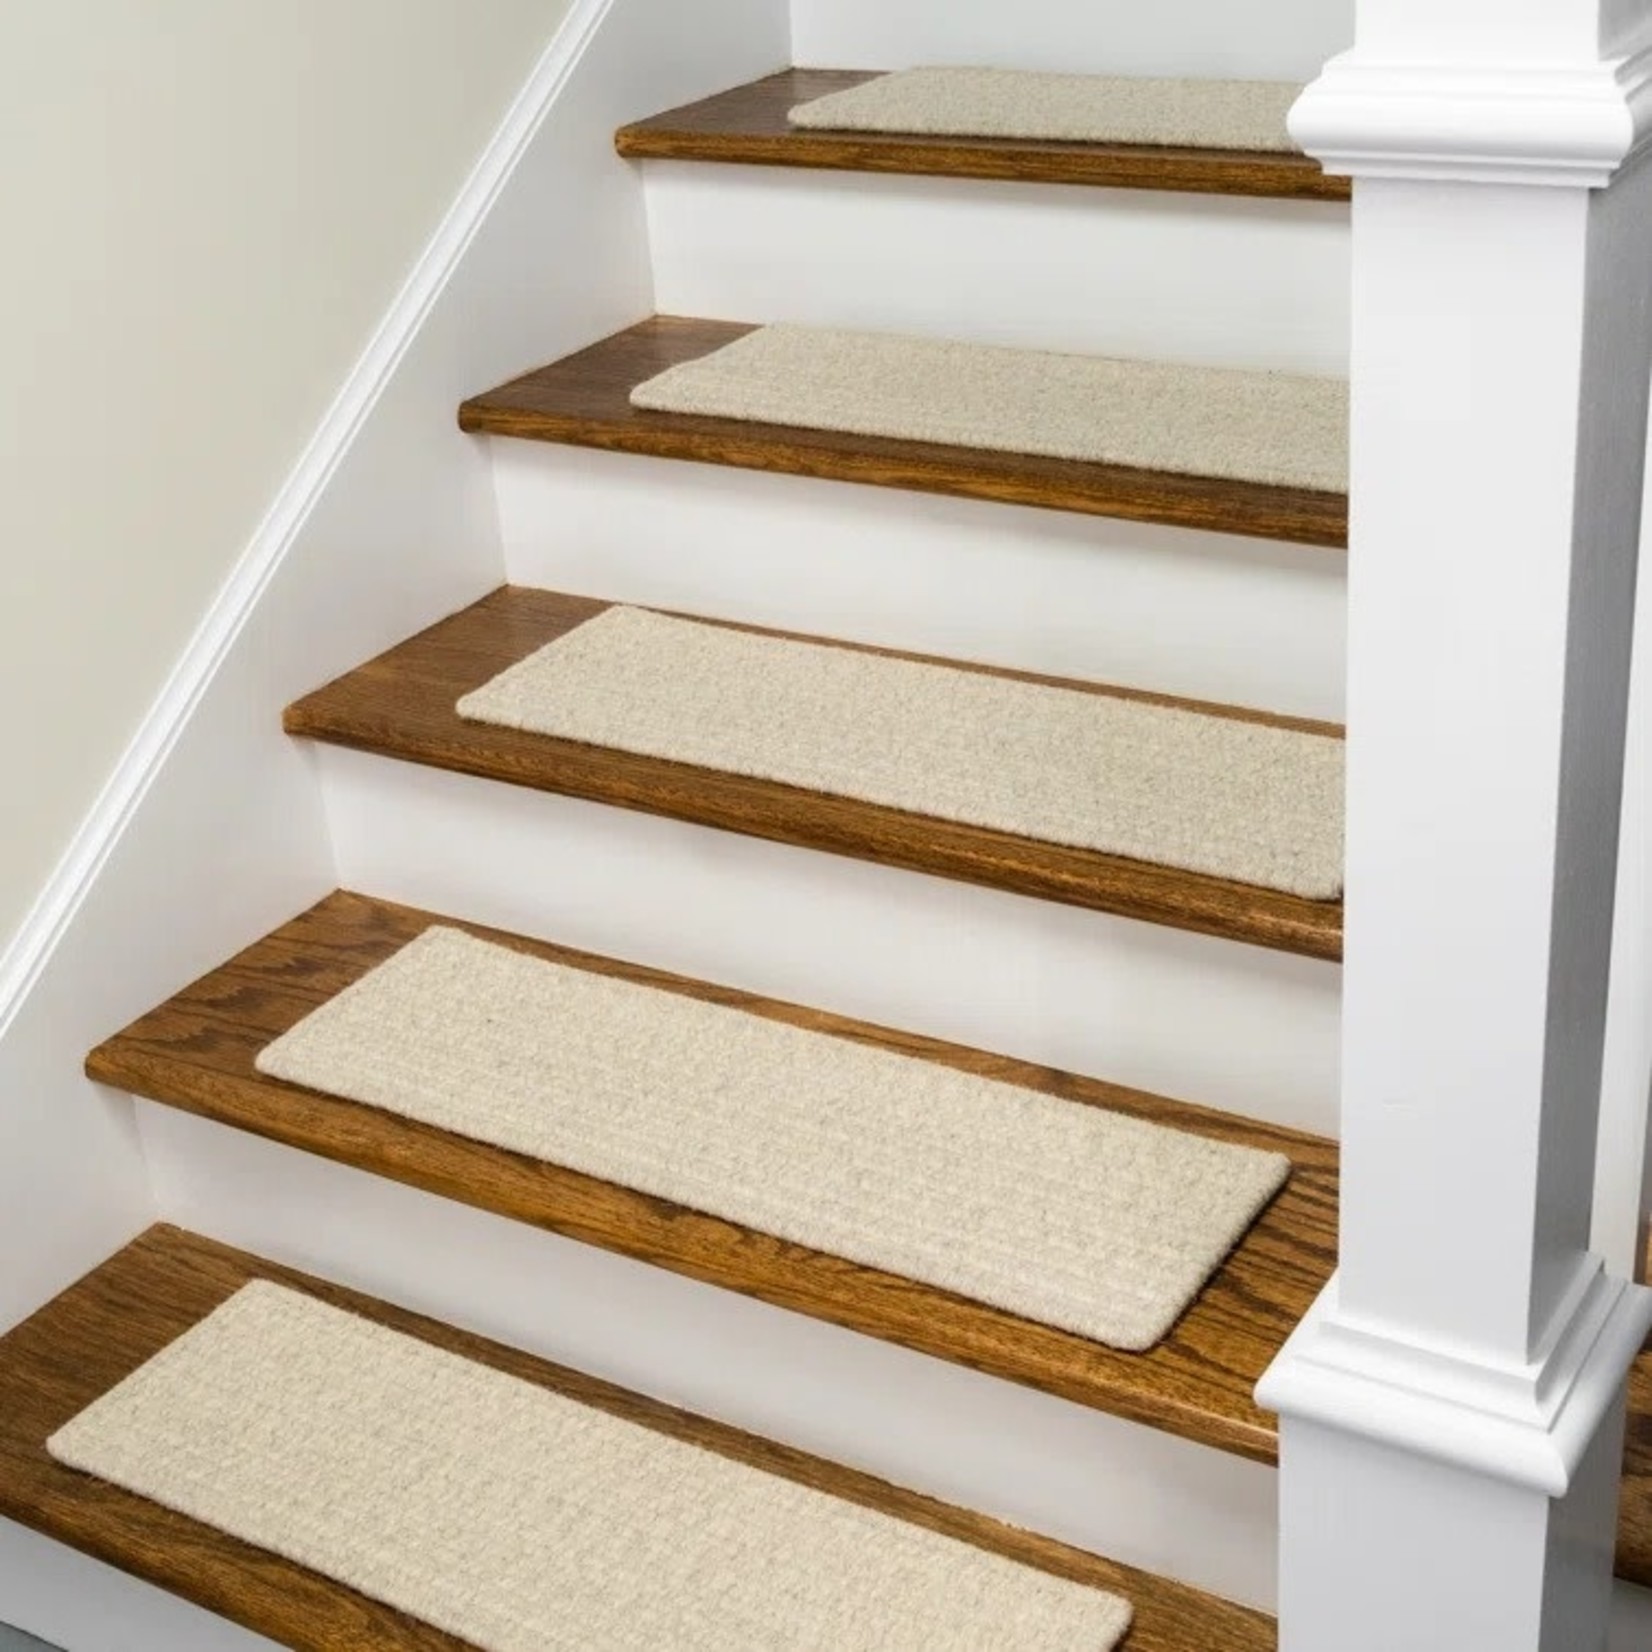 *8" x 28" Natural Woven Tweed Stair Treads - Set of 13 - Beige